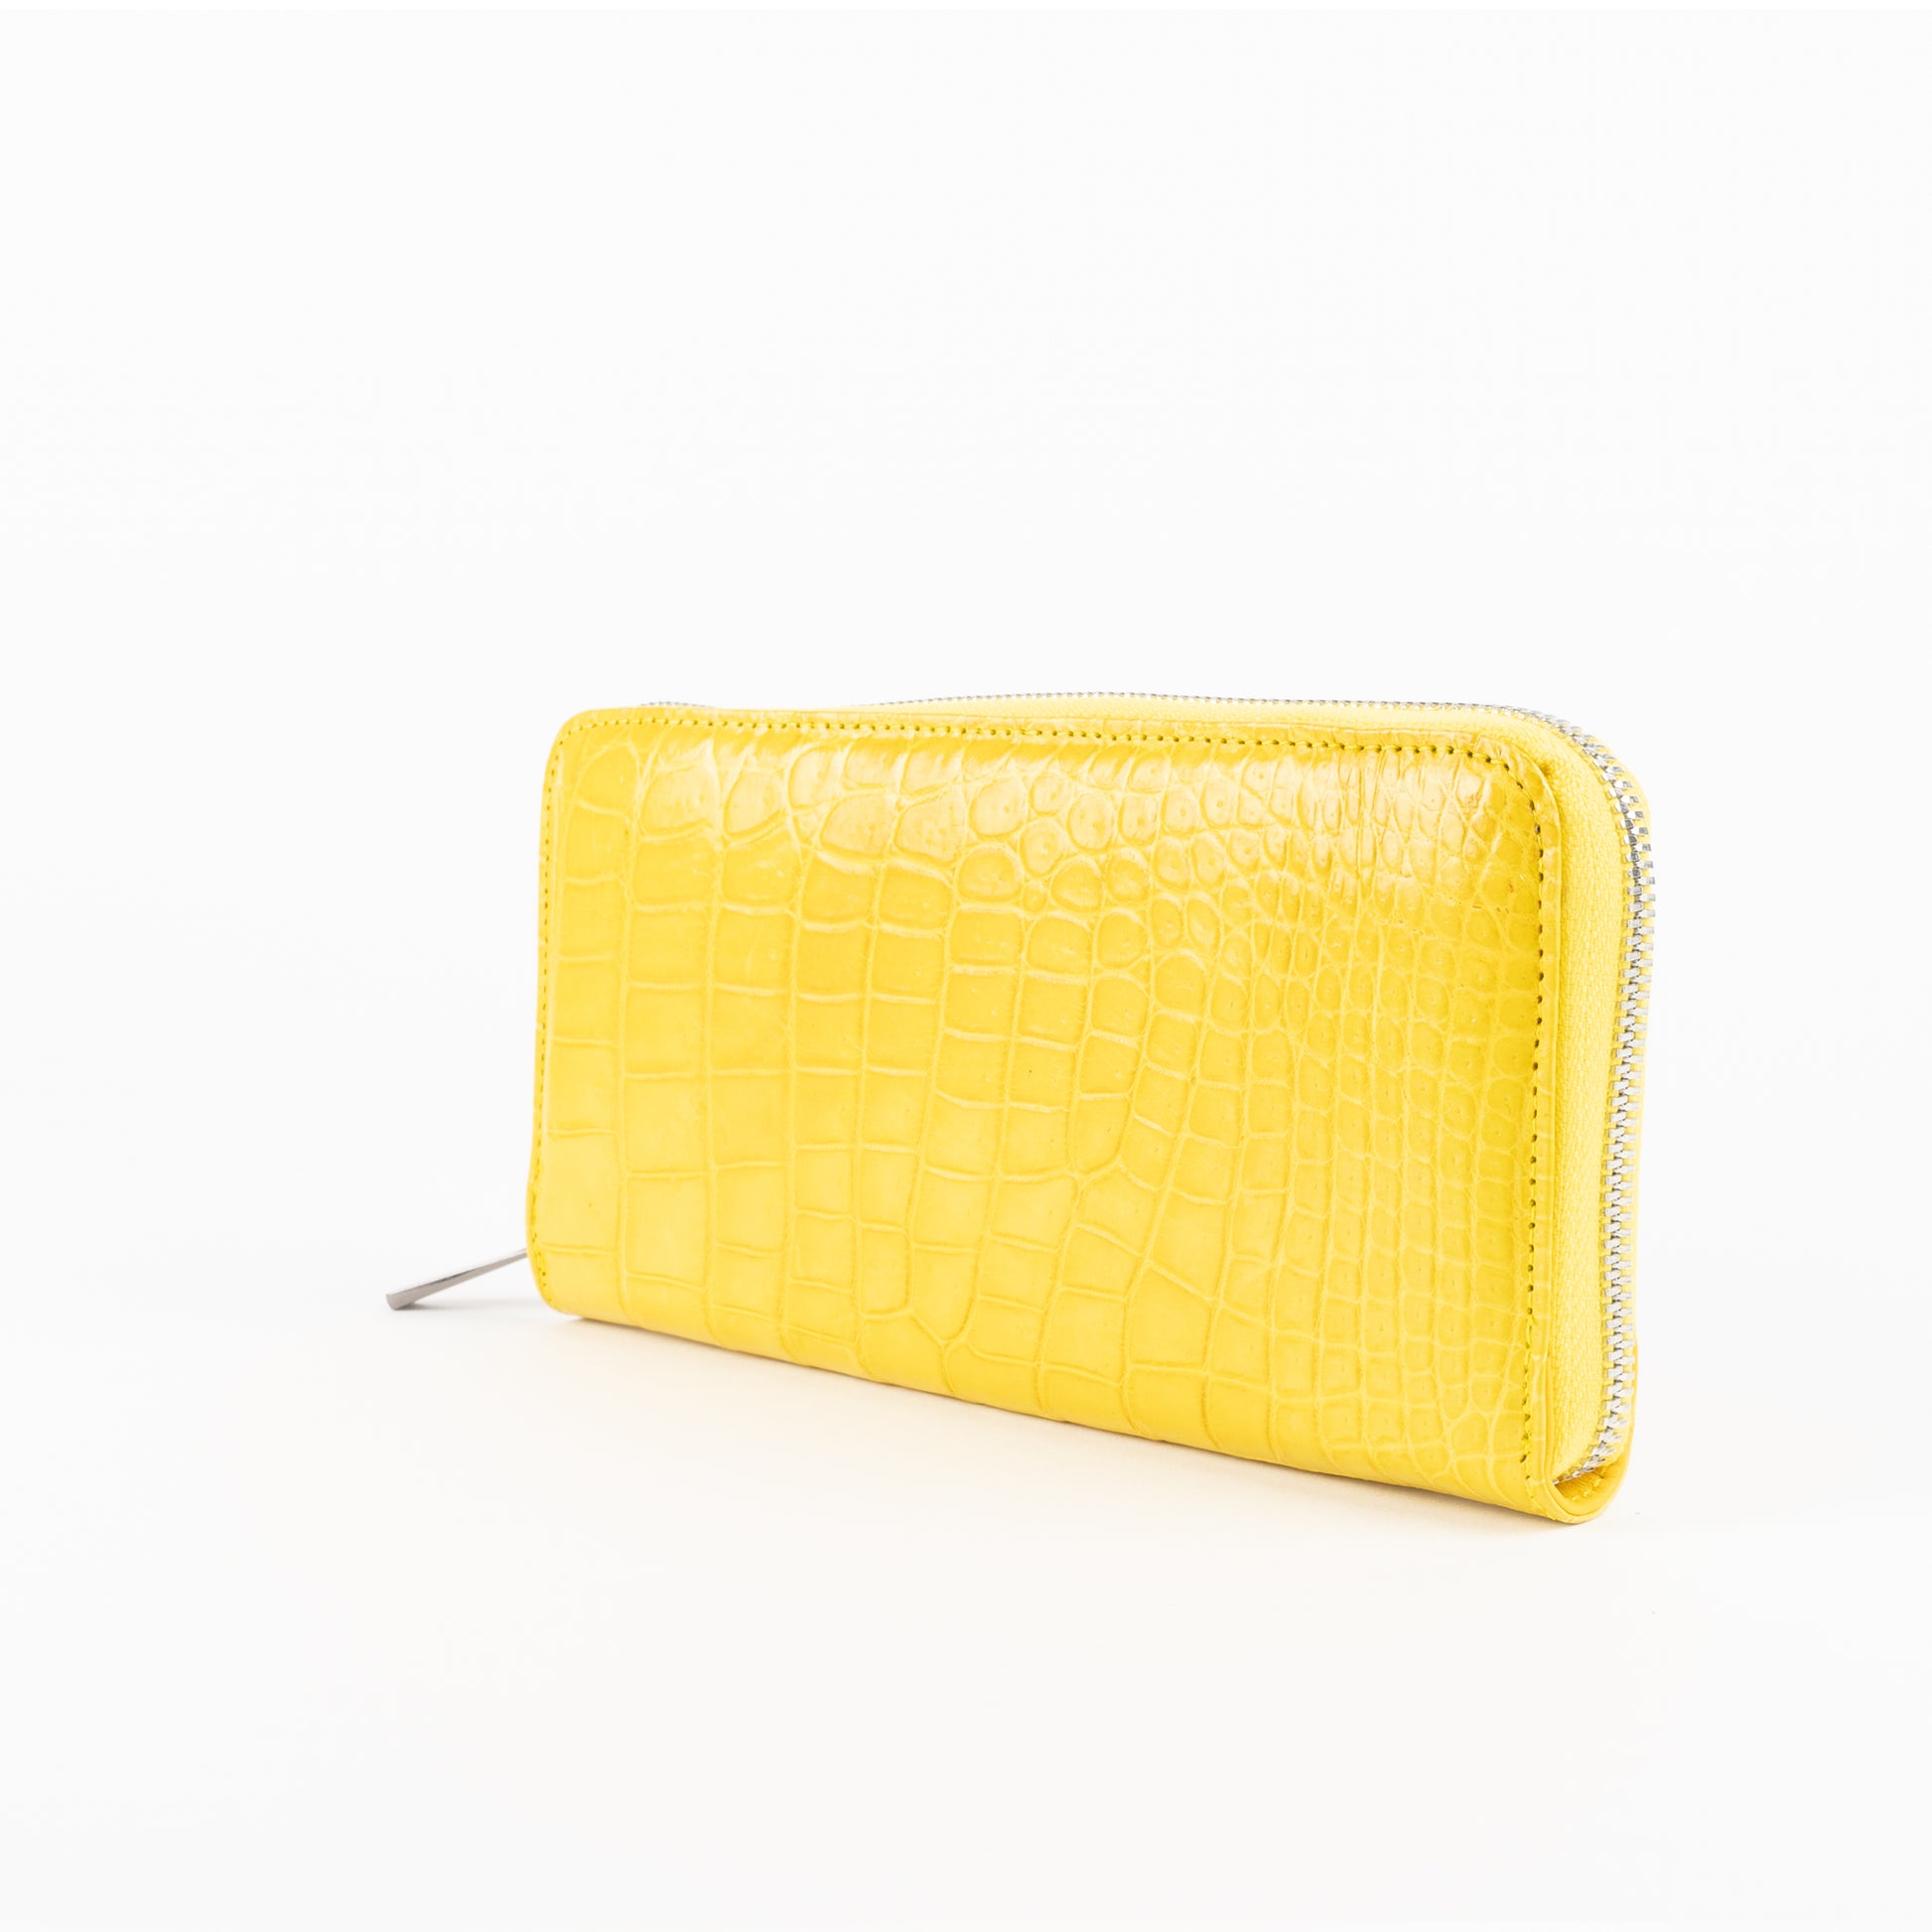 Crocodile wallet with liver zipper